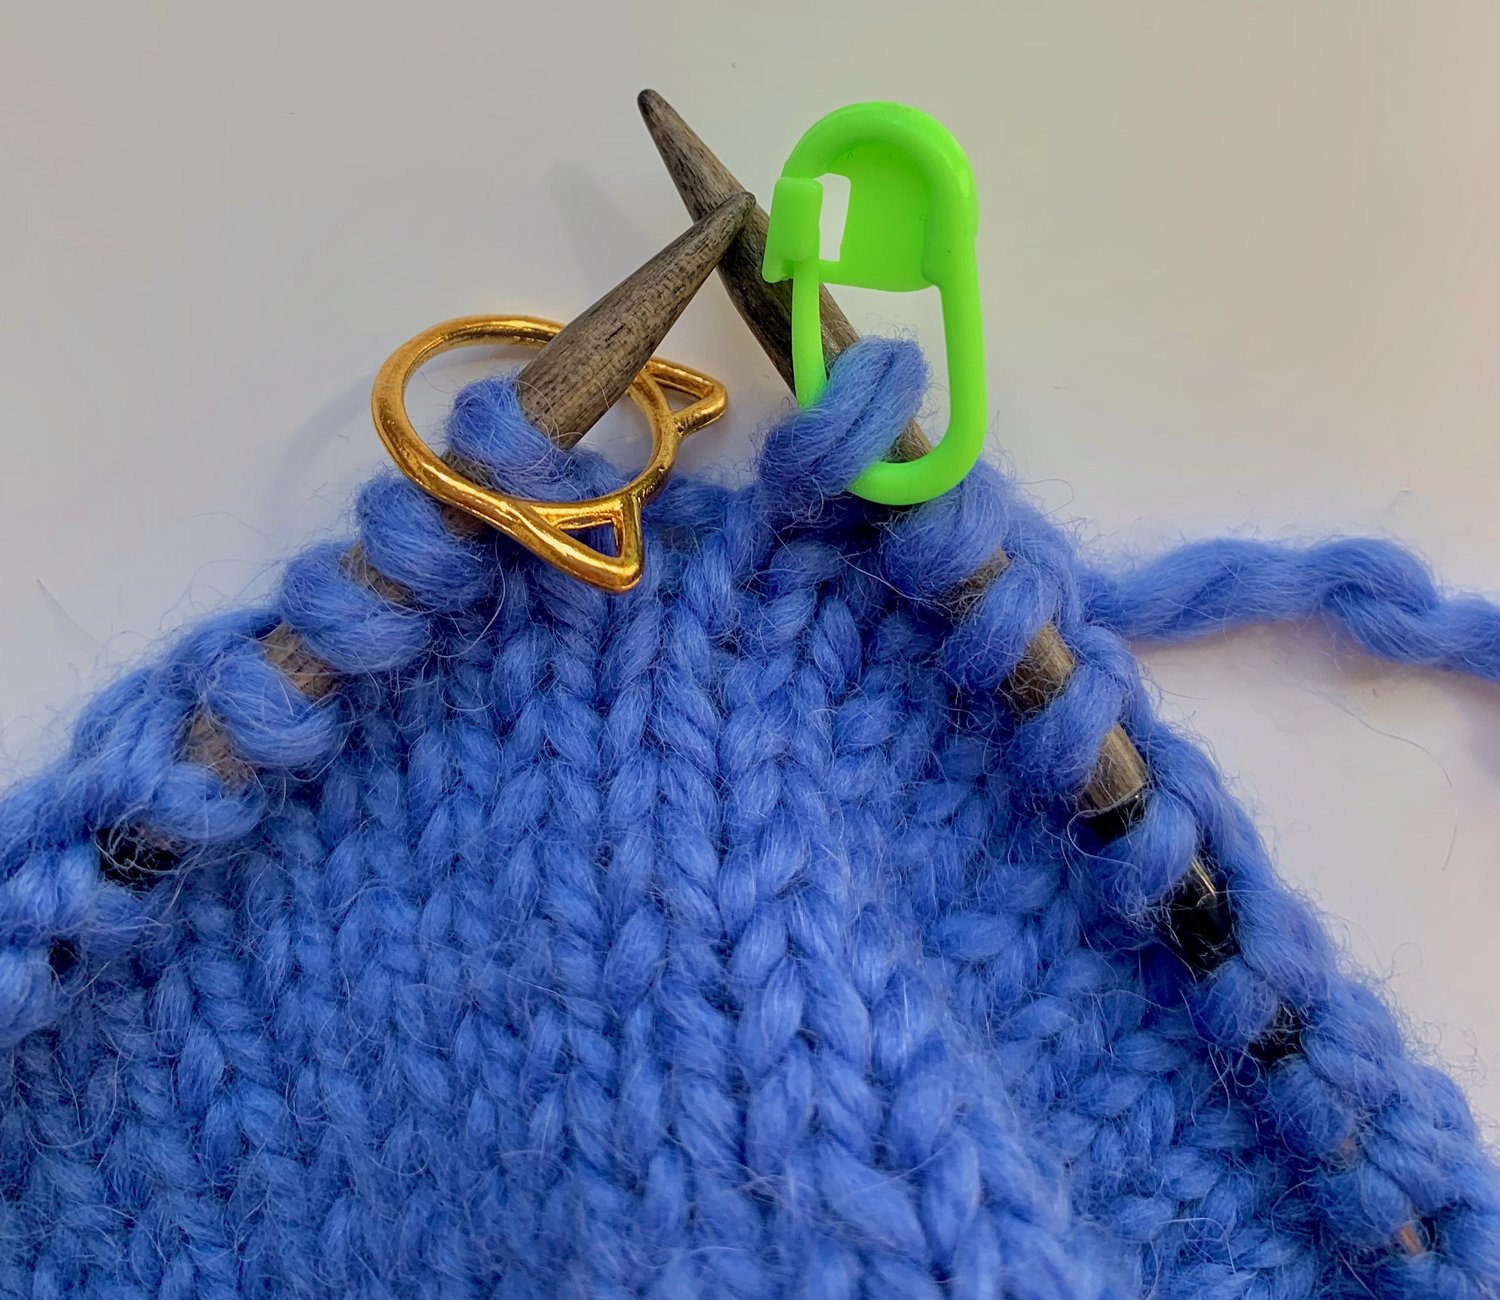 Learn To Knit with Stitch & Story